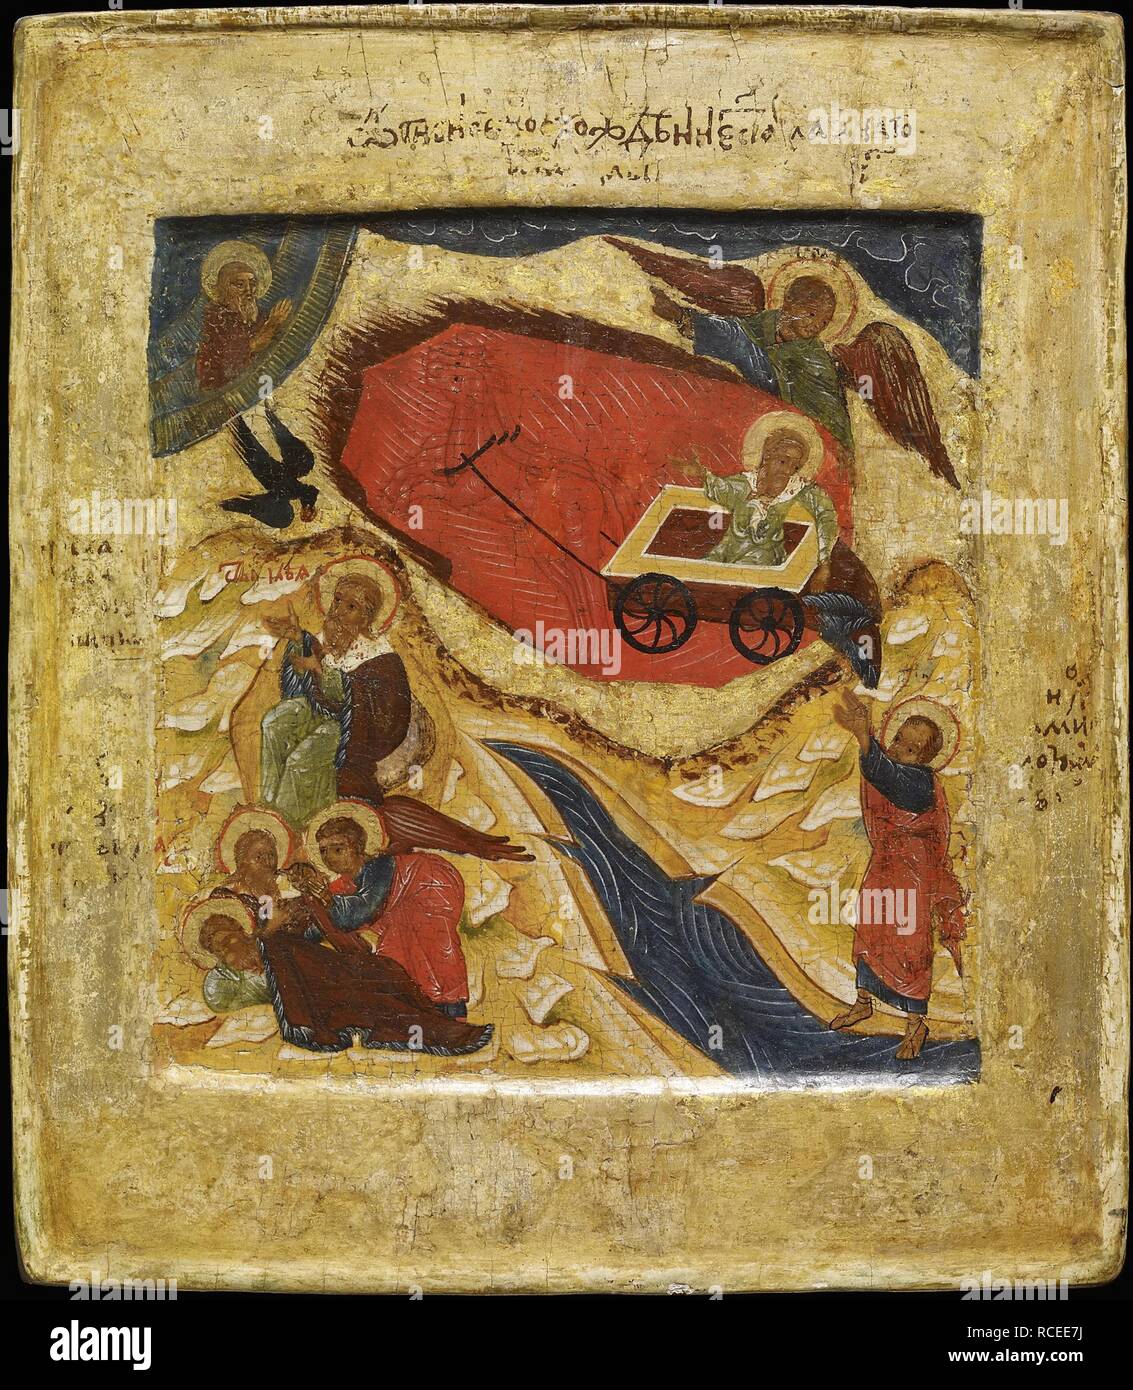 The Prophet Elijah and the Fiery Chariot. Museum: BRITISH MUSEUM. Author: Russian icon. Stock Photo